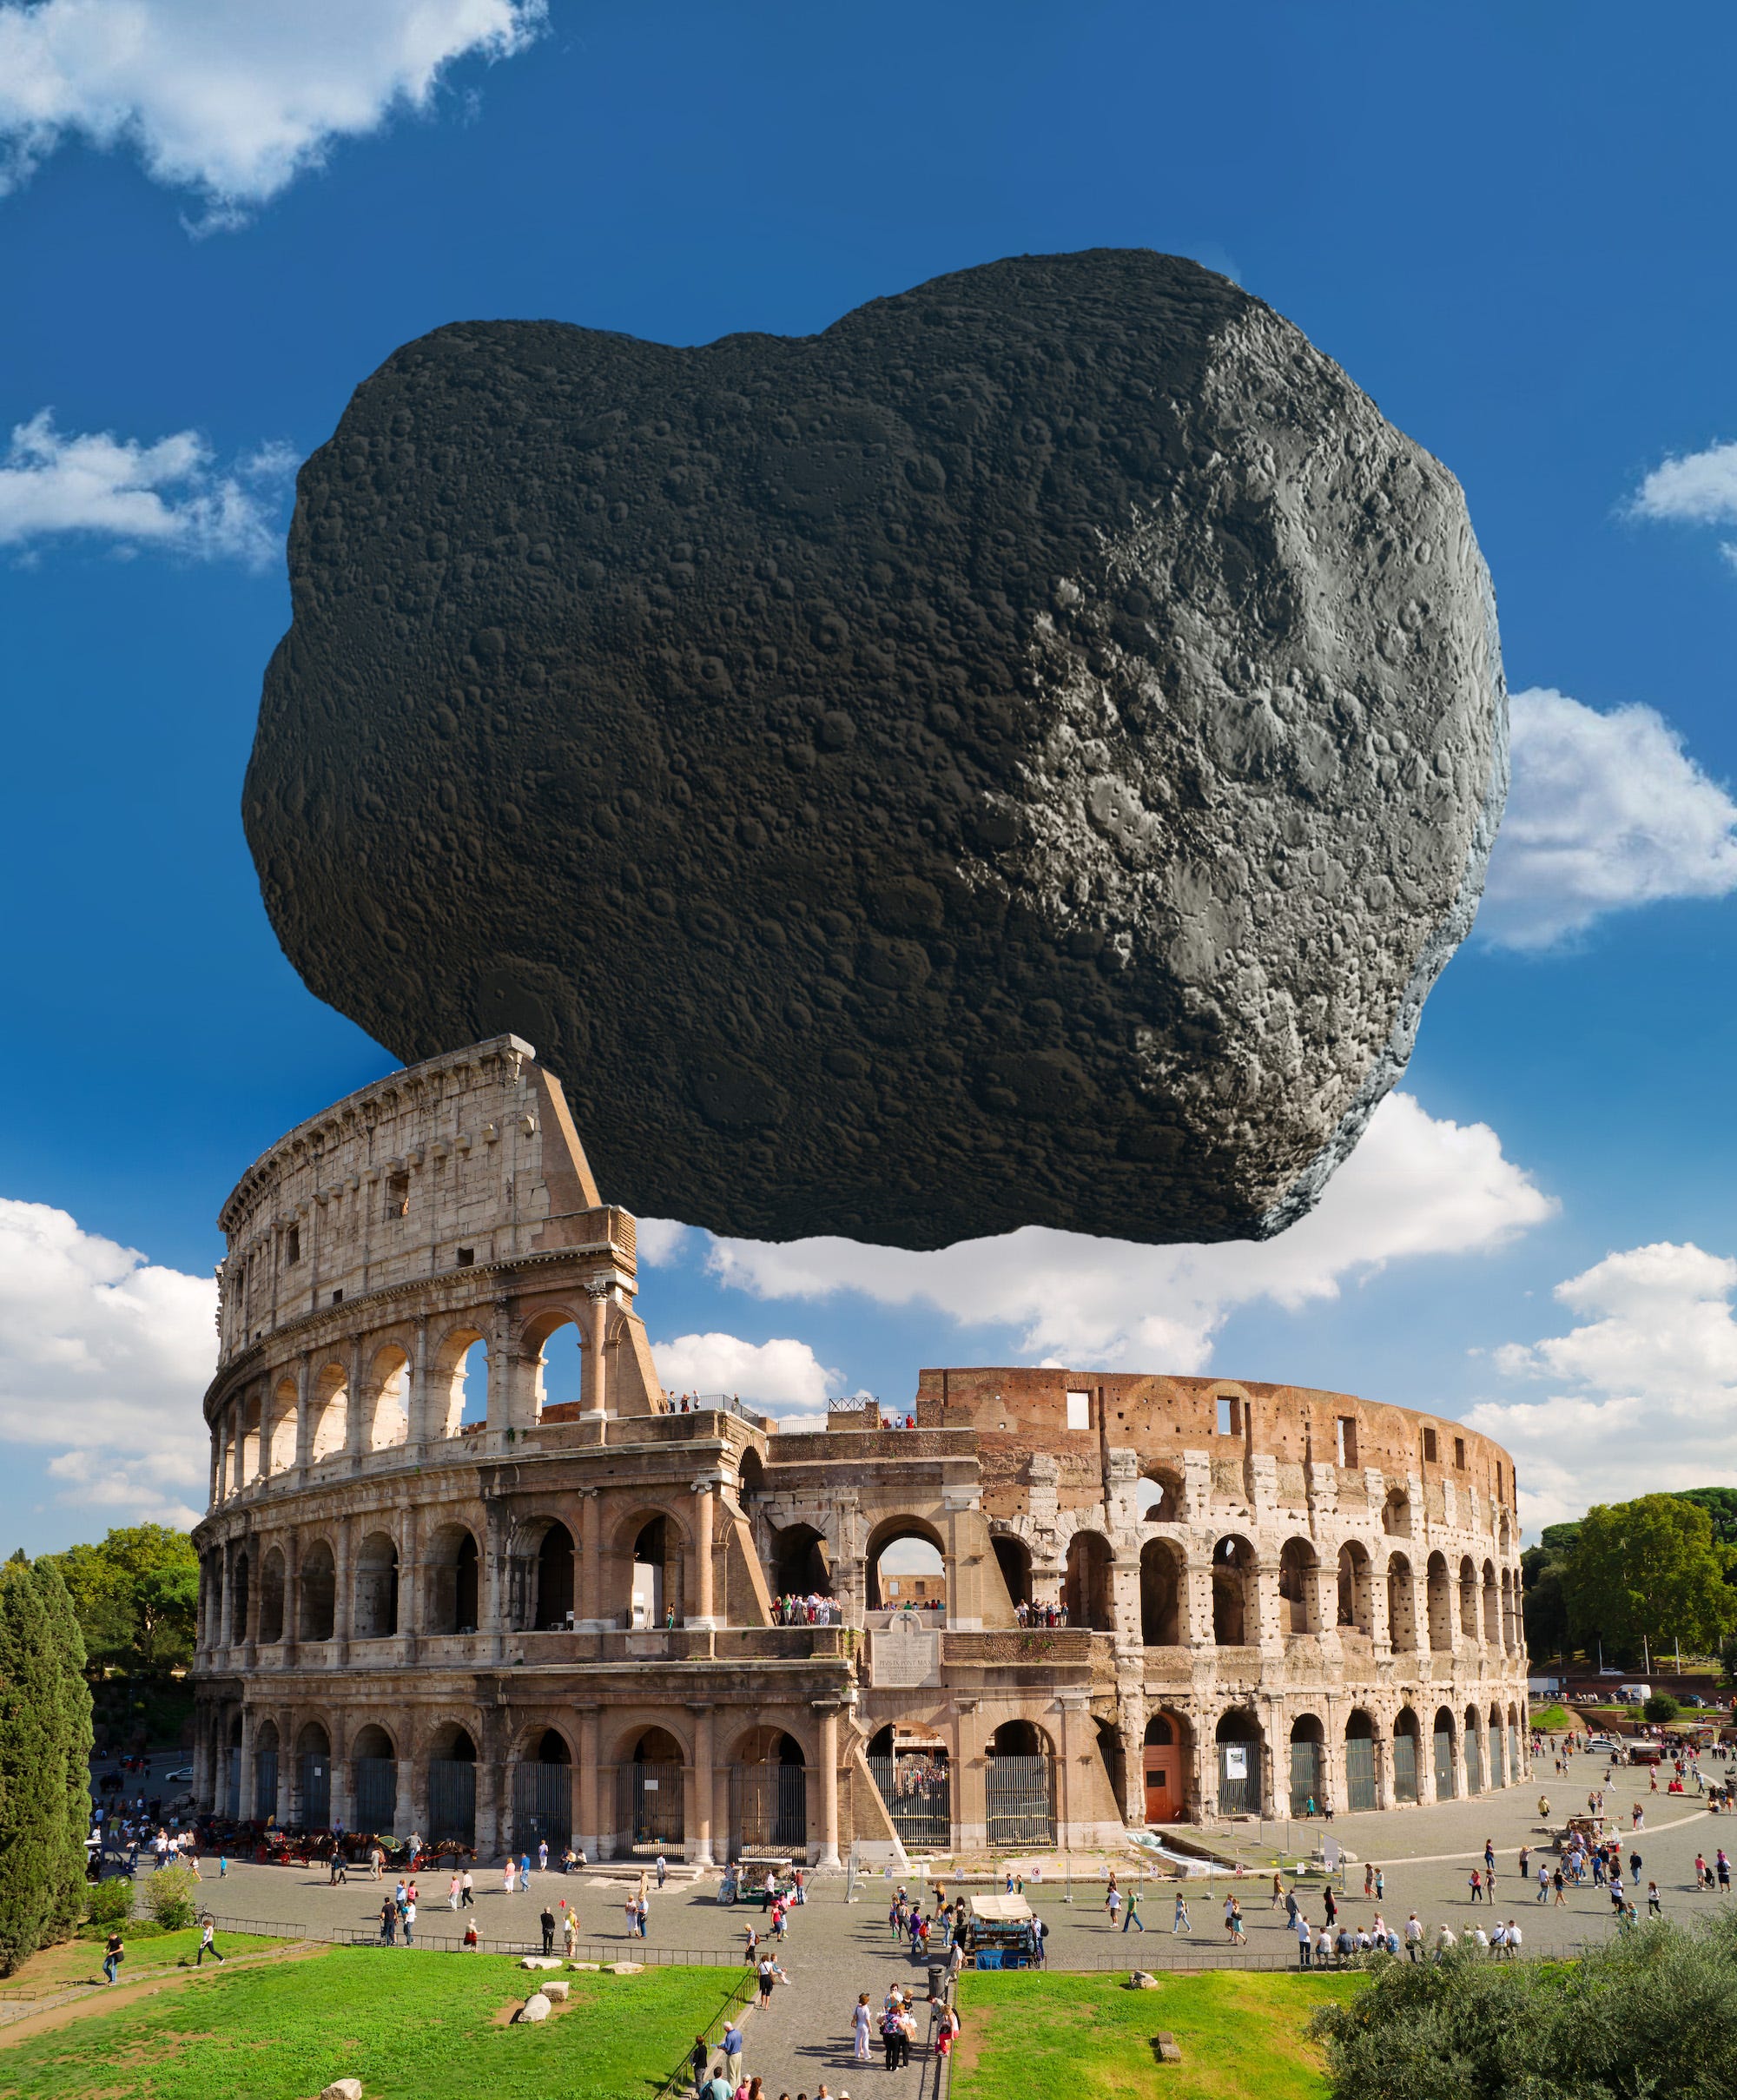 asteroid dimorphos edited next to rome Colosseum showing they are the same size